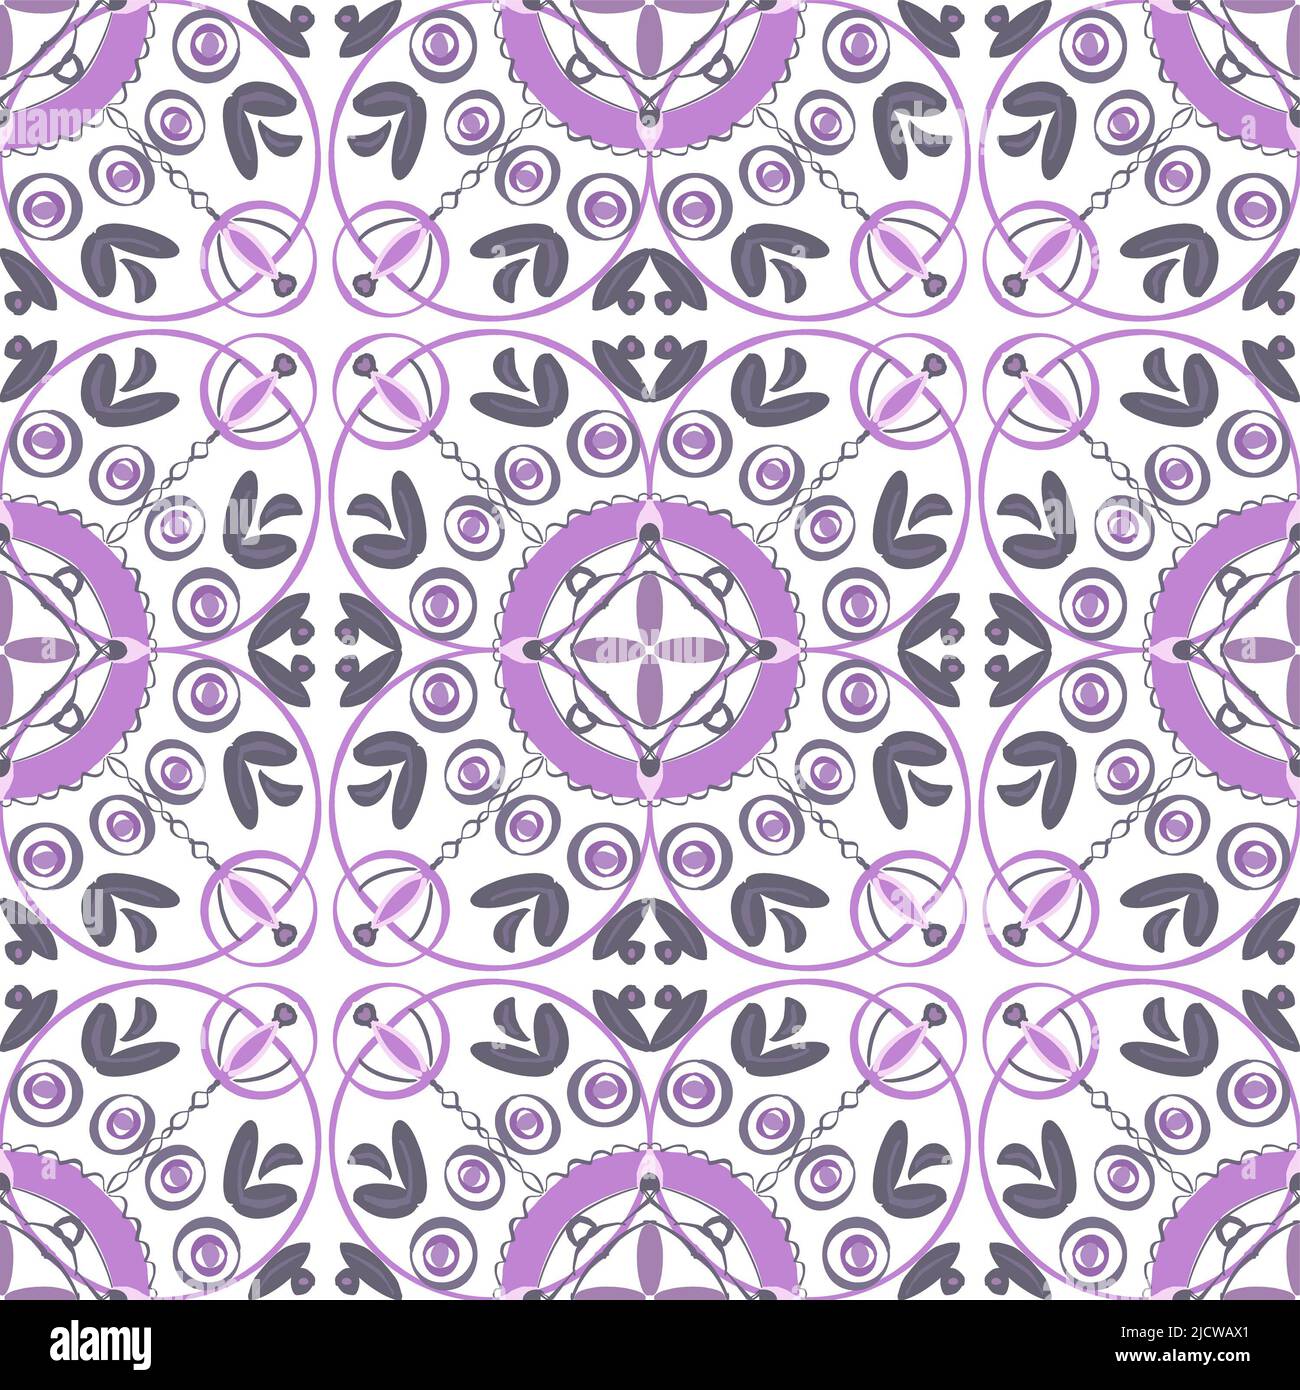 A mauve and grey mandala style design on white. Seamless surface pattern repeat. Wallpaper, fabric, home decor. Hand drawn. Stock Photo